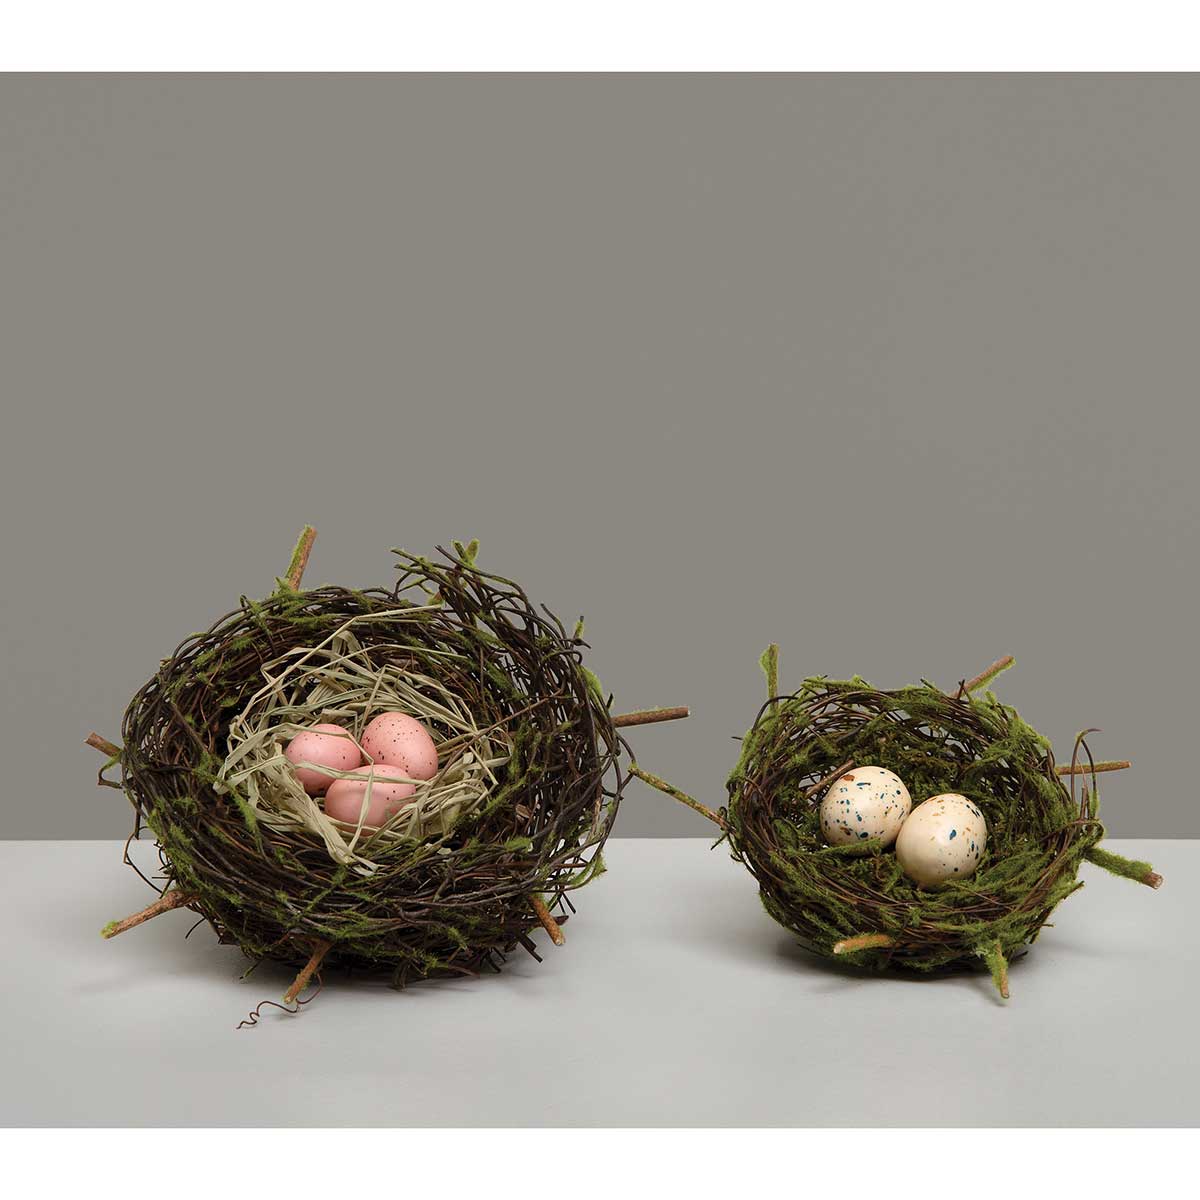 TWIG NEST WITH RAFFIA, MOSS AND PINK EGGS 6"X2.5"